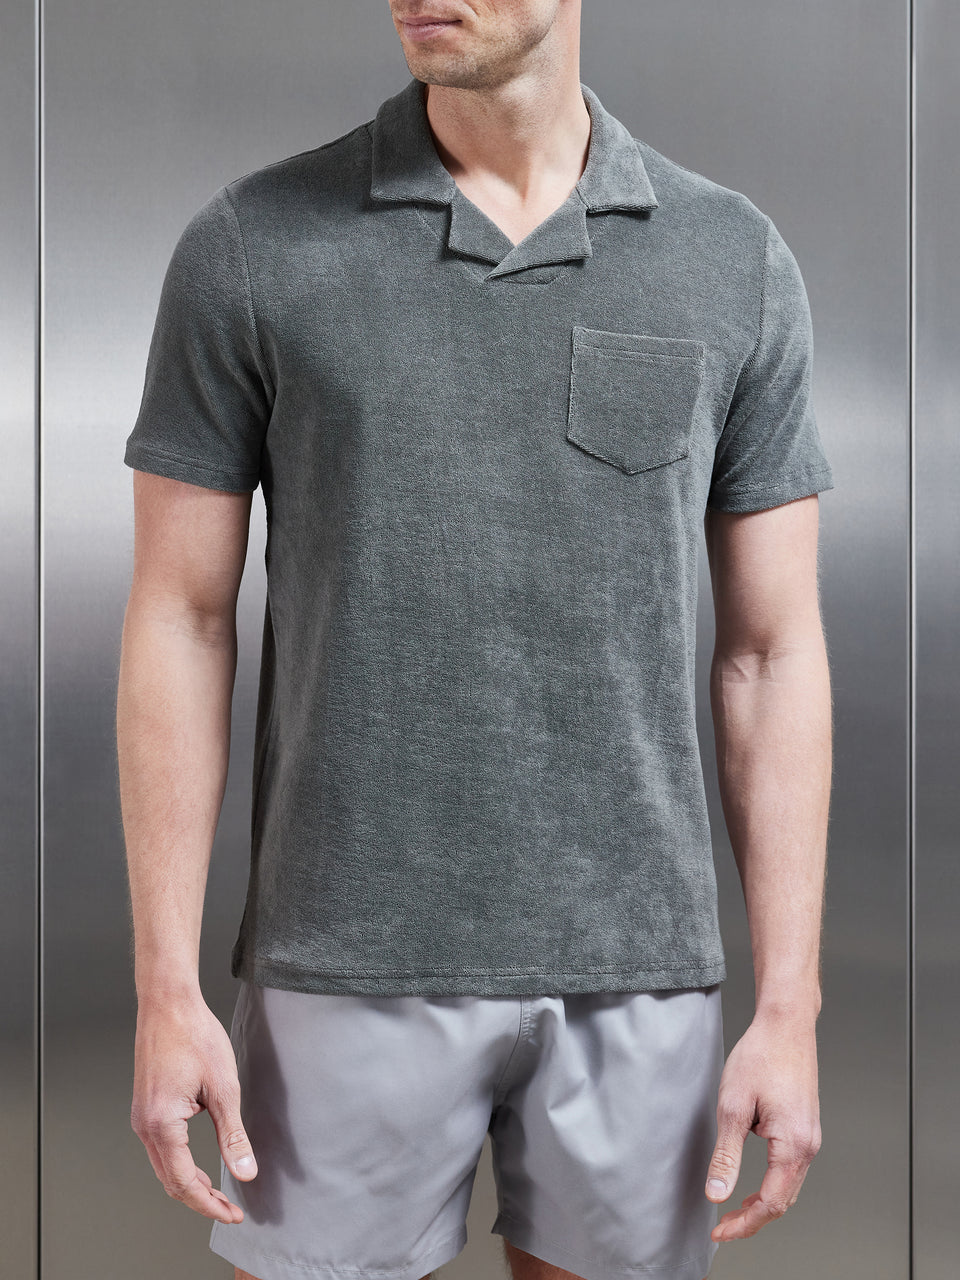 Towelling Revere Collar Polo Shirt in Sage